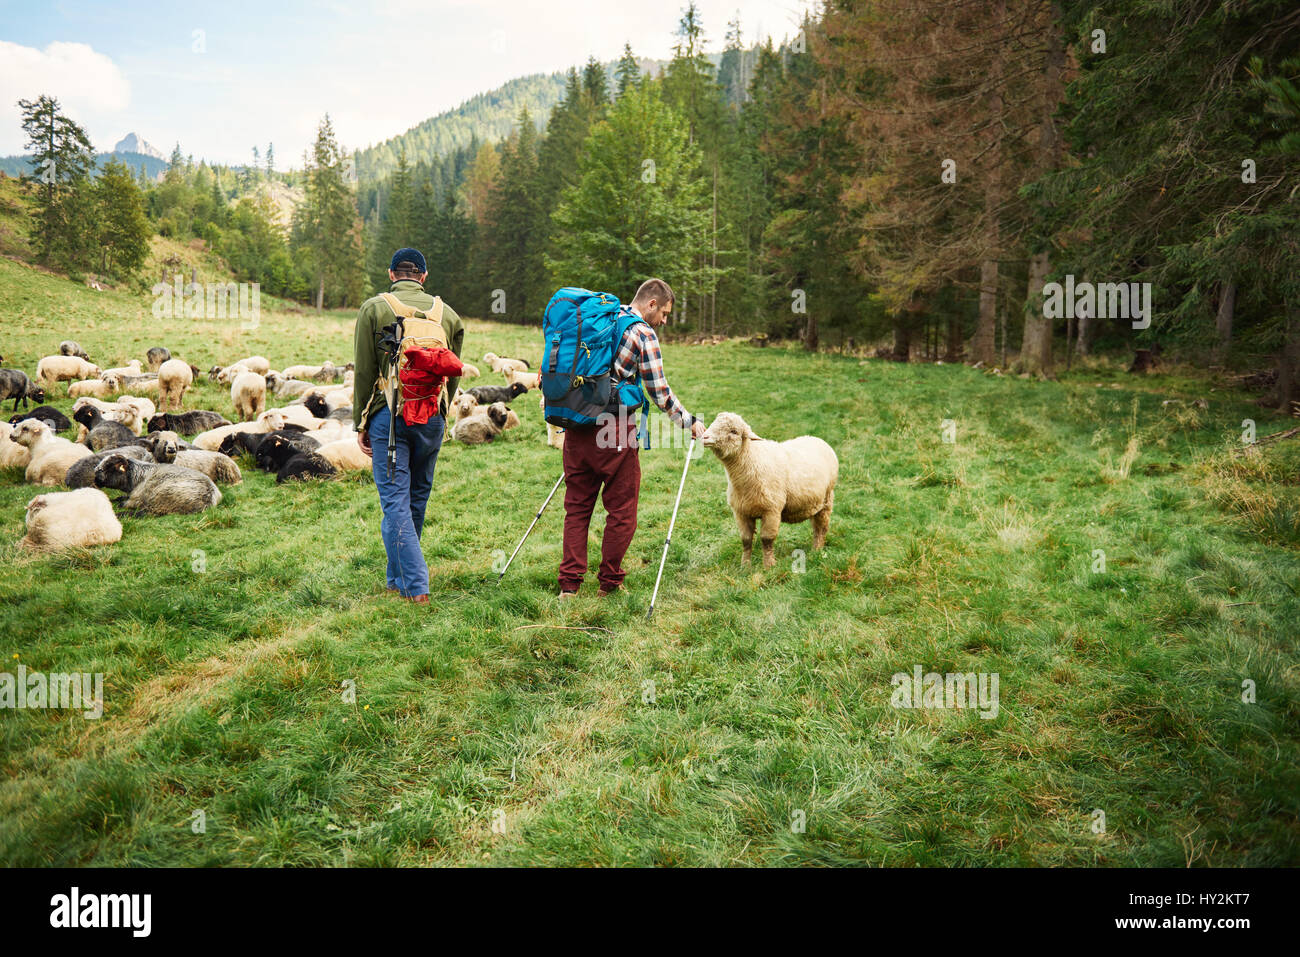 Two hikers walking by sheep in the outdoors Stock Photo